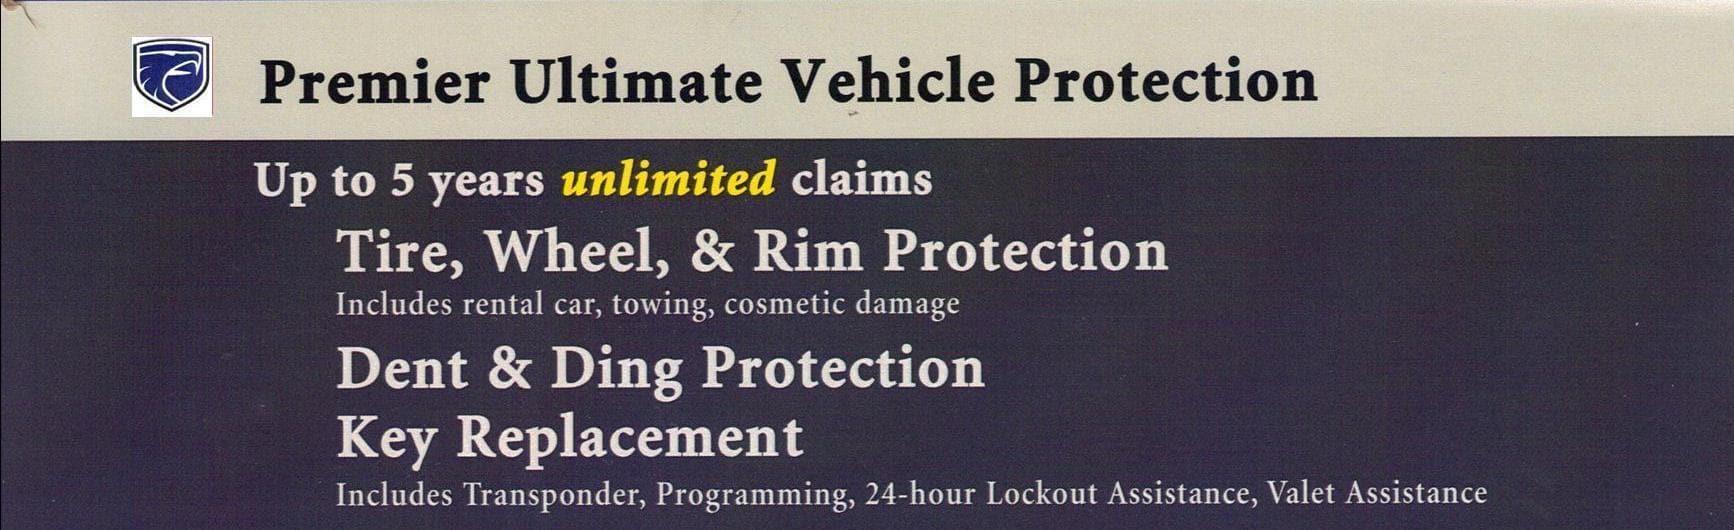 Protect Your New Investment | Savage L&B Dodge Chrysler Jeep in Robesonia PA